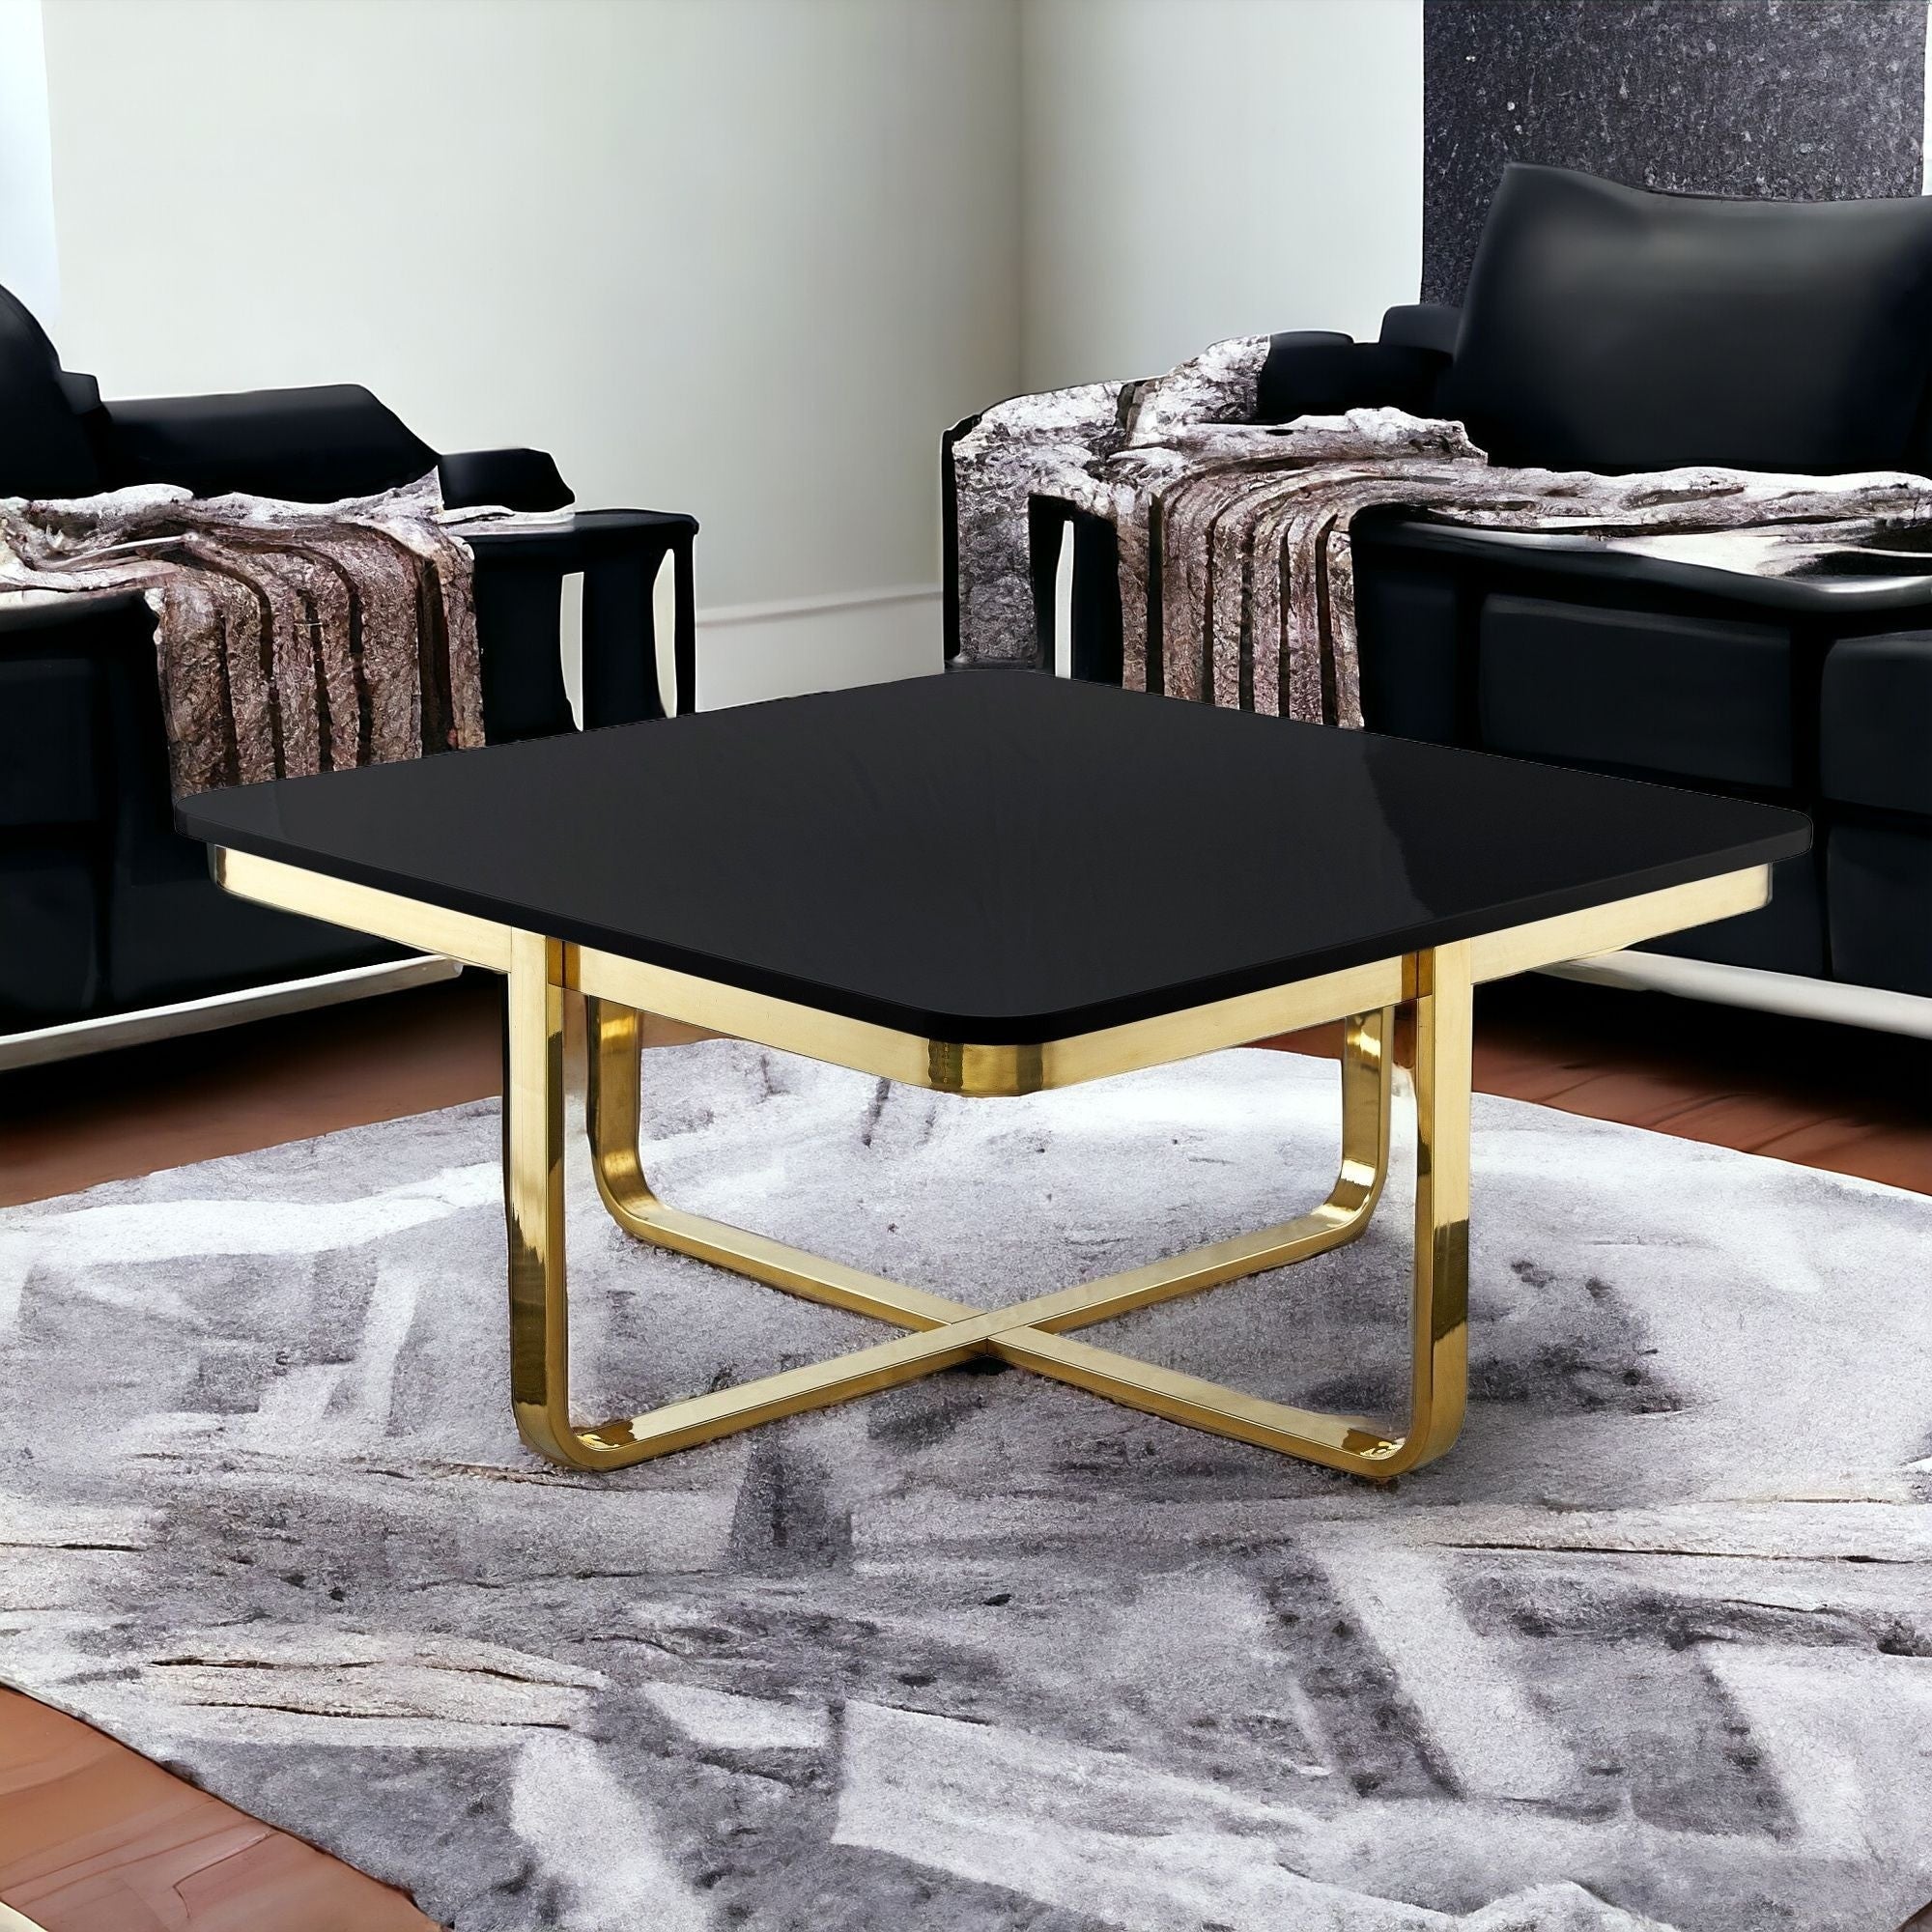 35" Black And Gold Stainless Steel Square Coffee Table